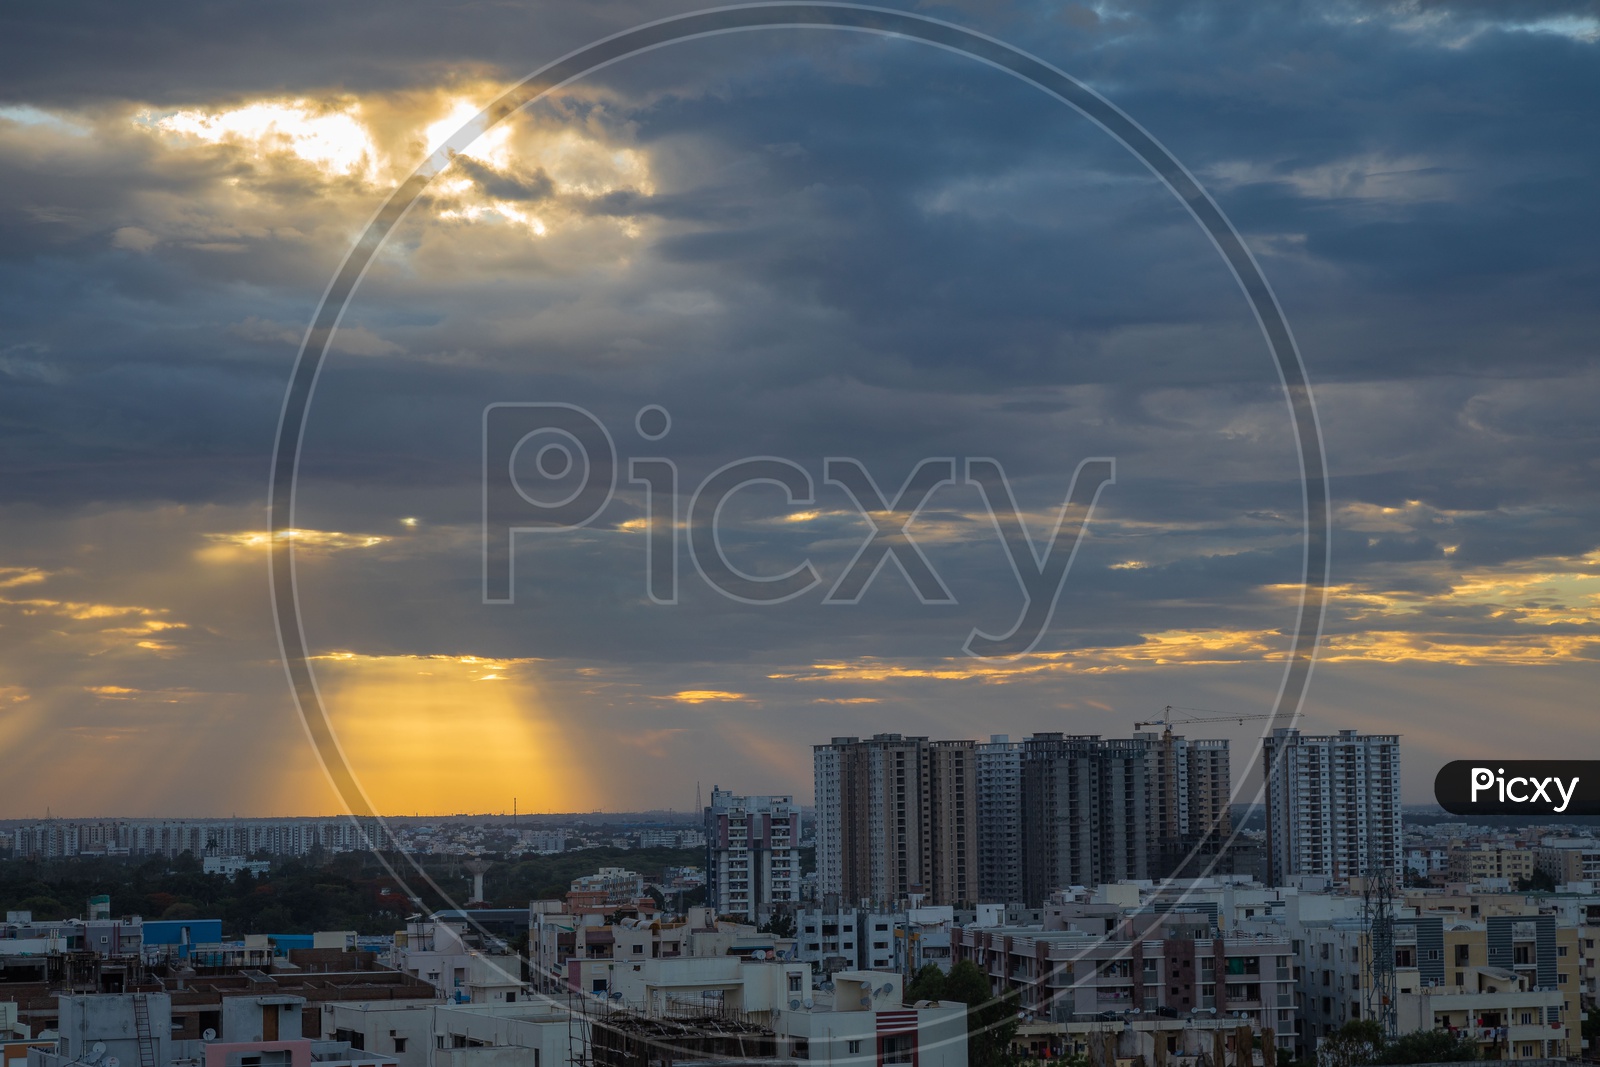 Hyderabad City scape With High Rise Buildings Over a Golden Hour Sky With Dark Clouds